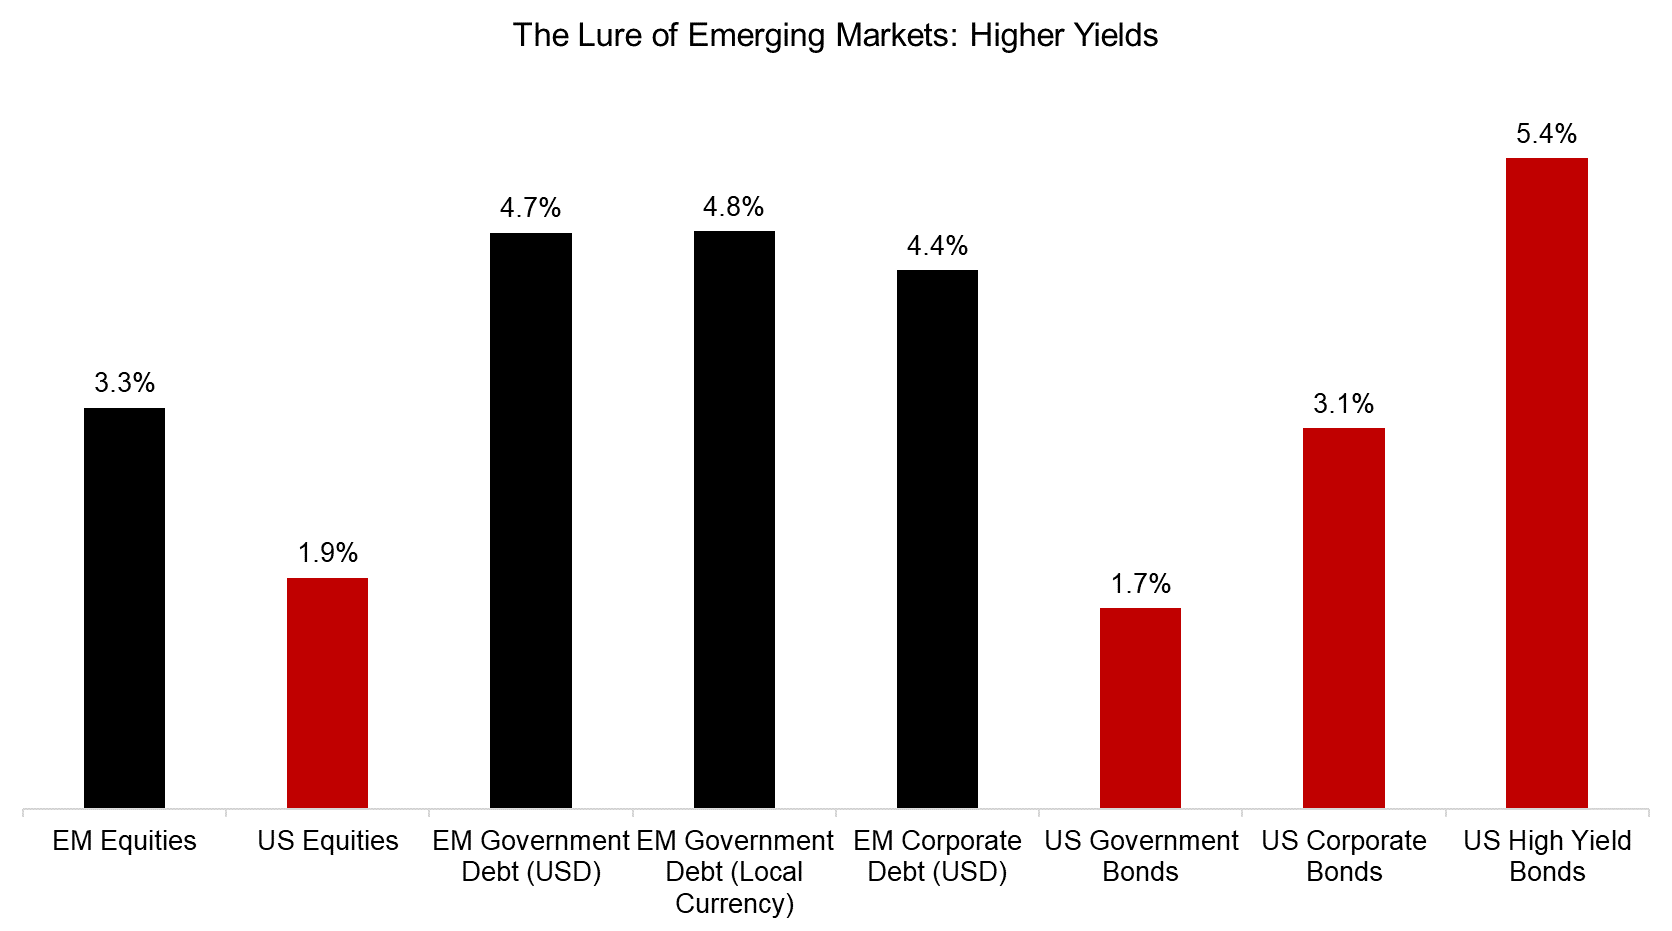 The Lure of Emerging Markets Higher Yields